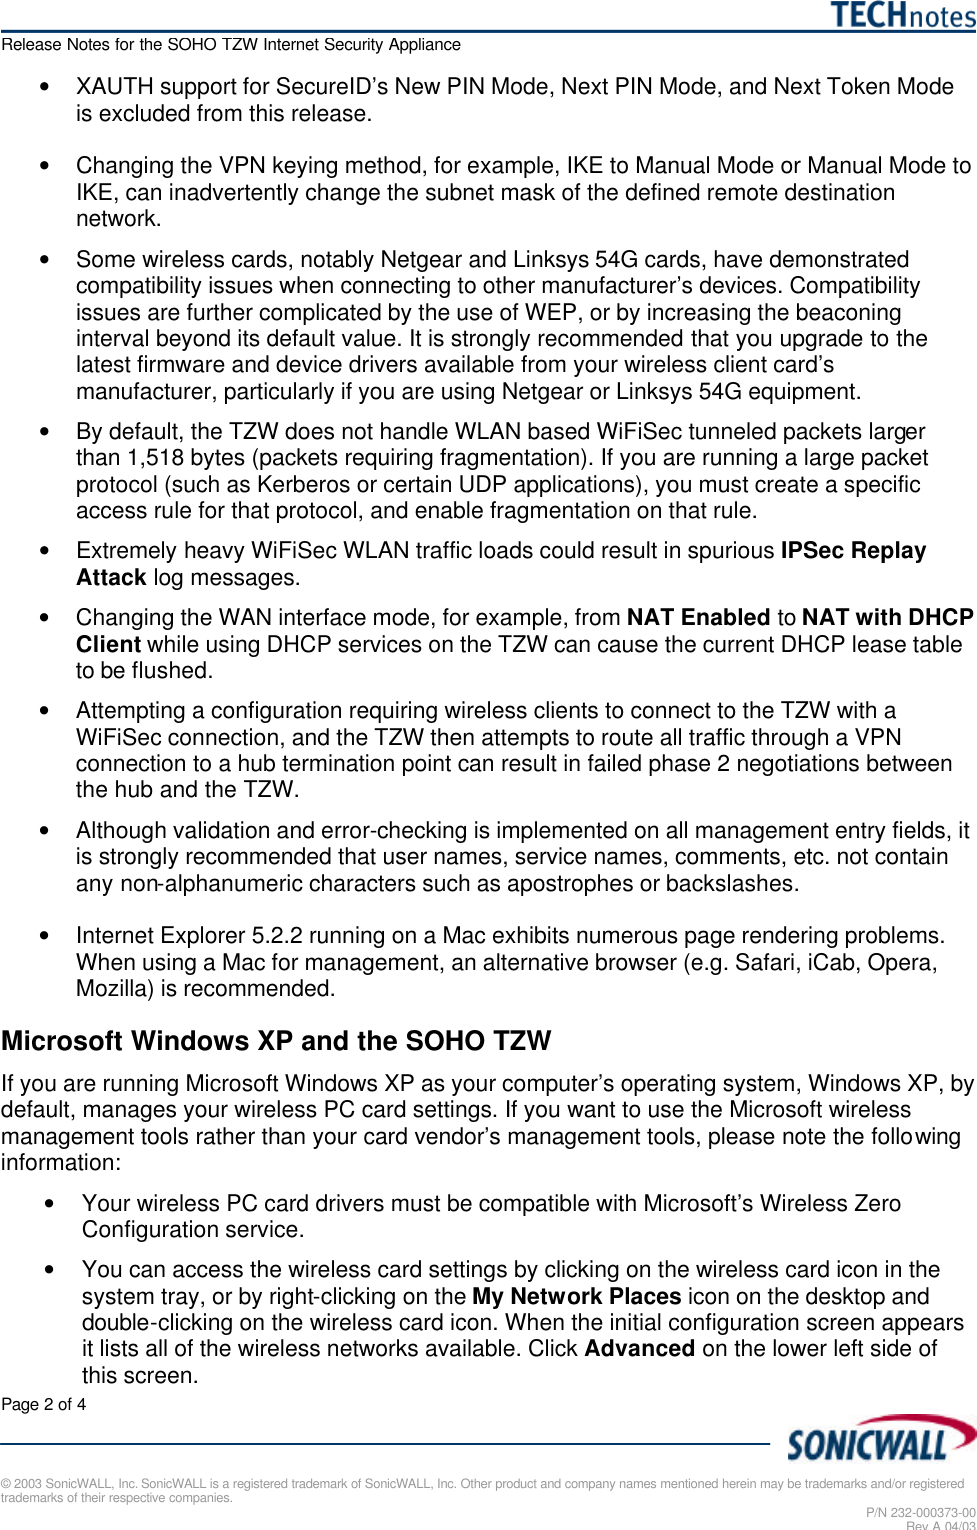   Release Notes for the SOHO TZW Internet Security Appliance Page 2 of 4   © 2003 SonicWALL, Inc. SonicWALL is a registered trademark of SonicWALL, Inc. Other product and company names mentioned herein may be trademarks and/or registered trademarks of their respective companies. P/N 232-000373-00 Rev A 04/03 • XAUTH support for SecureID’s New PIN Mode, Next PIN Mode, and Next Token Mode is excluded from this release.  • Changing the VPN keying method, for example, IKE to Manual Mode or Manual Mode to IKE, can inadvertently change the subnet mask of the defined remote destination network.  • Some wireless cards, notably Netgear and Linksys 54G cards, have demonstrated compatibility issues when connecting to other manufacturer’s devices. Compatibility issues are further complicated by the use of WEP, or by increasing the beaconing interval beyond its default value. It is strongly recommended that you upgrade to the latest firmware and device drivers available from your wireless client card’s manufacturer, particularly if you are using Netgear or Linksys 54G equipment. • By default, the TZW does not handle WLAN based WiFiSec tunneled packets larger than 1,518 bytes (packets requiring fragmentation). If you are running a large packet protocol (such as Kerberos or certain UDP applications), you must create a specific access rule for that protocol, and enable fragmentation on that rule. • Extremely heavy WiFiSec WLAN traffic loads could result in spurious IPSec Replay Attack log messages. • Changing the WAN interface mode, for example, from NAT Enabled to NAT with DHCP Client while using DHCP services on the TZW can cause the current DHCP lease table to be flushed. • Attempting a configuration requiring wireless clients to connect to the TZW with a WiFiSec connection, and the TZW then attempts to route all traffic through a VPN connection to a hub termination point can result in failed phase 2 negotiations between the hub and the TZW. • Although validation and error-checking is implemented on all management entry fields, it is strongly recommended that user names, service names, comments, etc. not contain any non-alphanumeric characters such as apostrophes or backslashes. • Internet Explorer 5.2.2 running on a Mac exhibits numerous page rendering problems. When using a Mac for management, an alternative browser (e.g. Safari, iCab, Opera, Mozilla) is recommended. Microsoft Windows XP and the SOHO TZW If you are running Microsoft Windows XP as your computer’s operating system, Windows XP, by default, manages your wireless PC card settings. If you want to use the Microsoft wireless management tools rather than your card vendor’s management tools, please note the following information: • Your wireless PC card drivers must be compatible with Microsoft’s Wireless Zero Configuration service. • You can access the wireless card settings by clicking on the wireless card icon in the system tray, or by right-clicking on the My Network Places icon on the desktop and double-clicking on the wireless card icon. When the initial configuration screen appears it lists all of the wireless networks available. Click Advanced on the lower left side of this screen. 